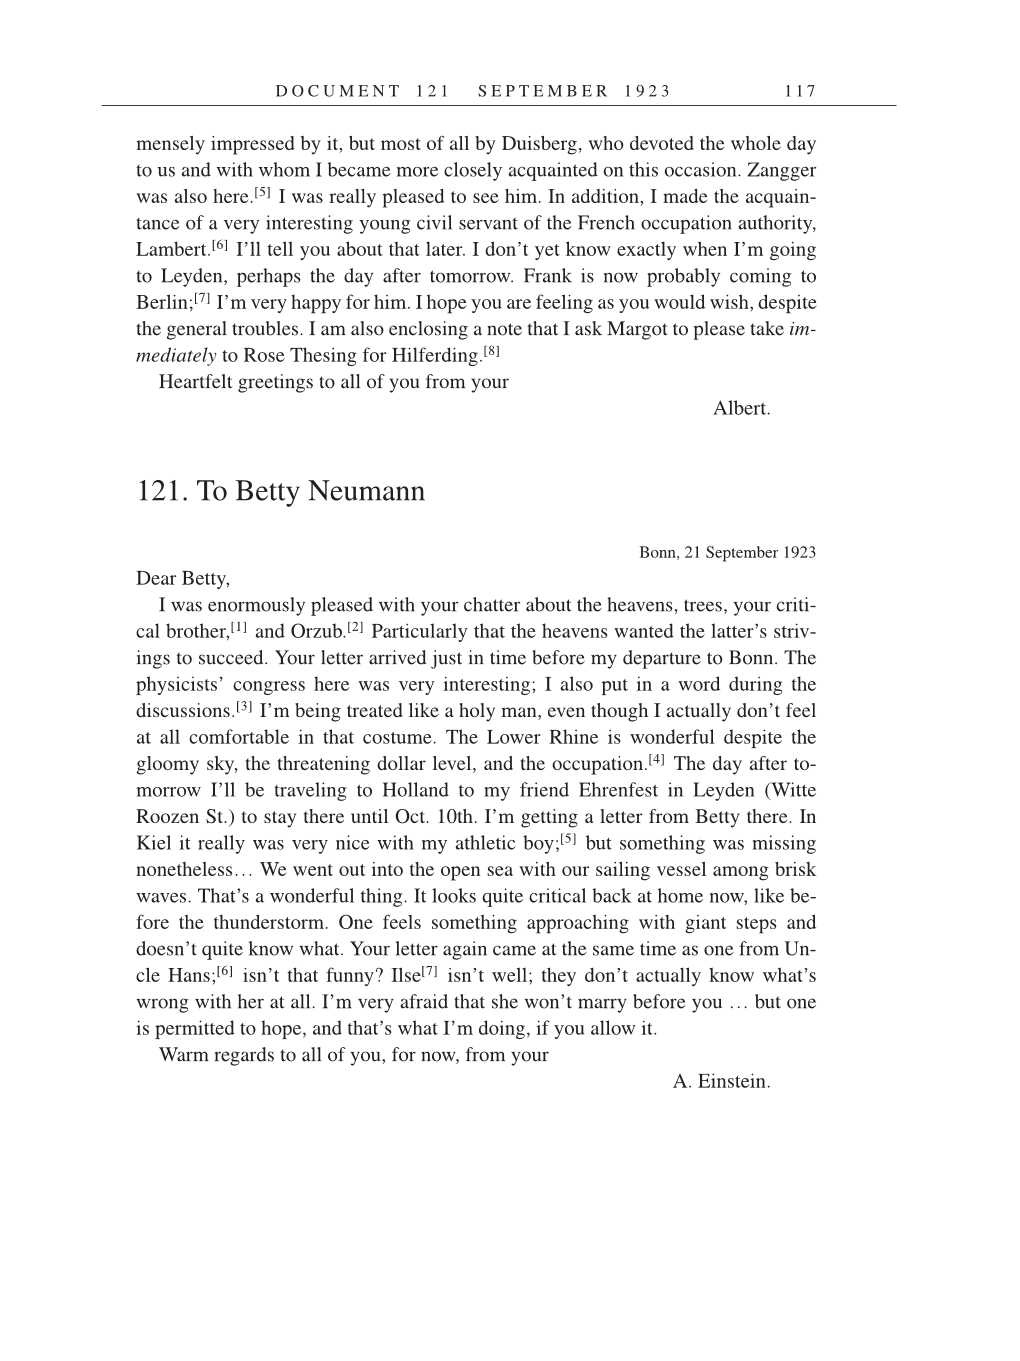 Volume 14: The Berlin Years: Writings & Correspondence, April 1923-May 1925 (English Translation Supplement) page 117